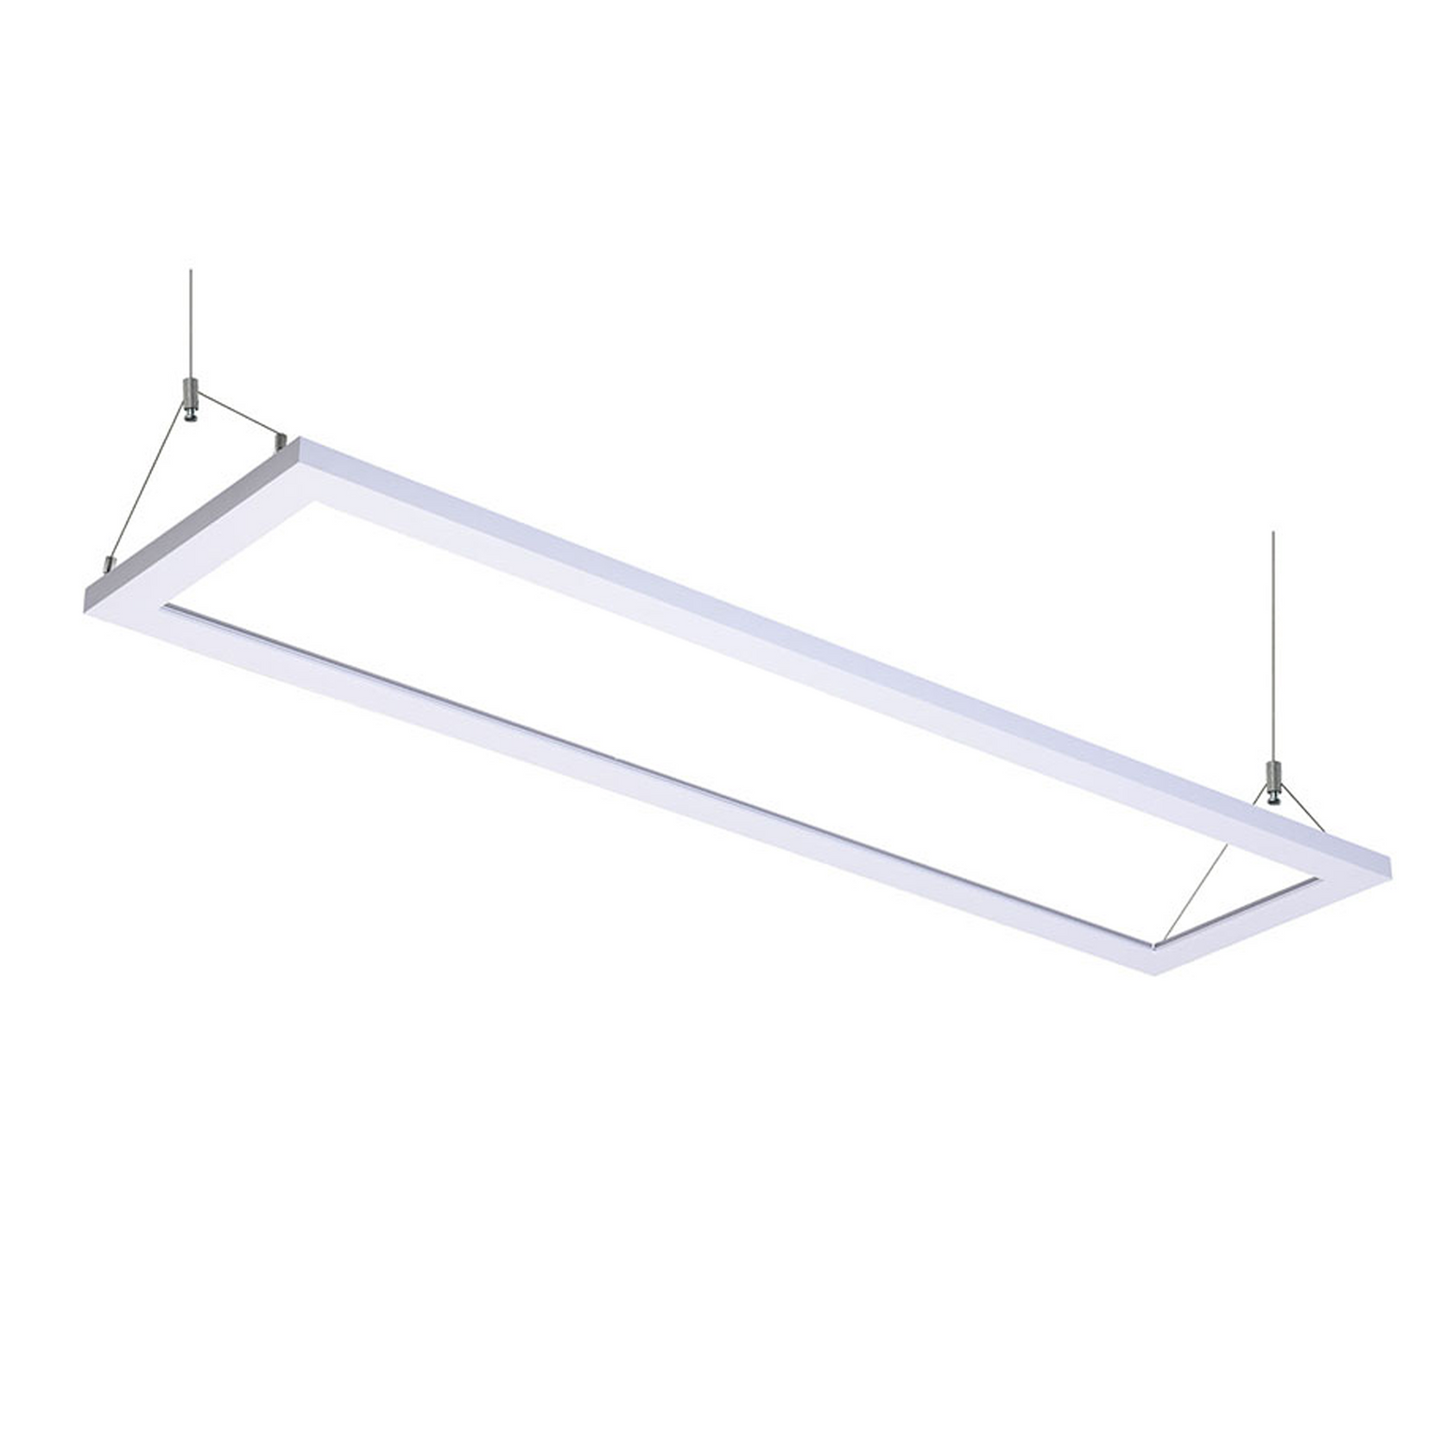 8 in. x 4 ft. LED Up/Down Pendant Linear Panel Light, 40W, 4600LM, CCT Adjustable 3000K/3500K/4000K, Damp Location Rated, Suspended Mounted, Architectural Lighting